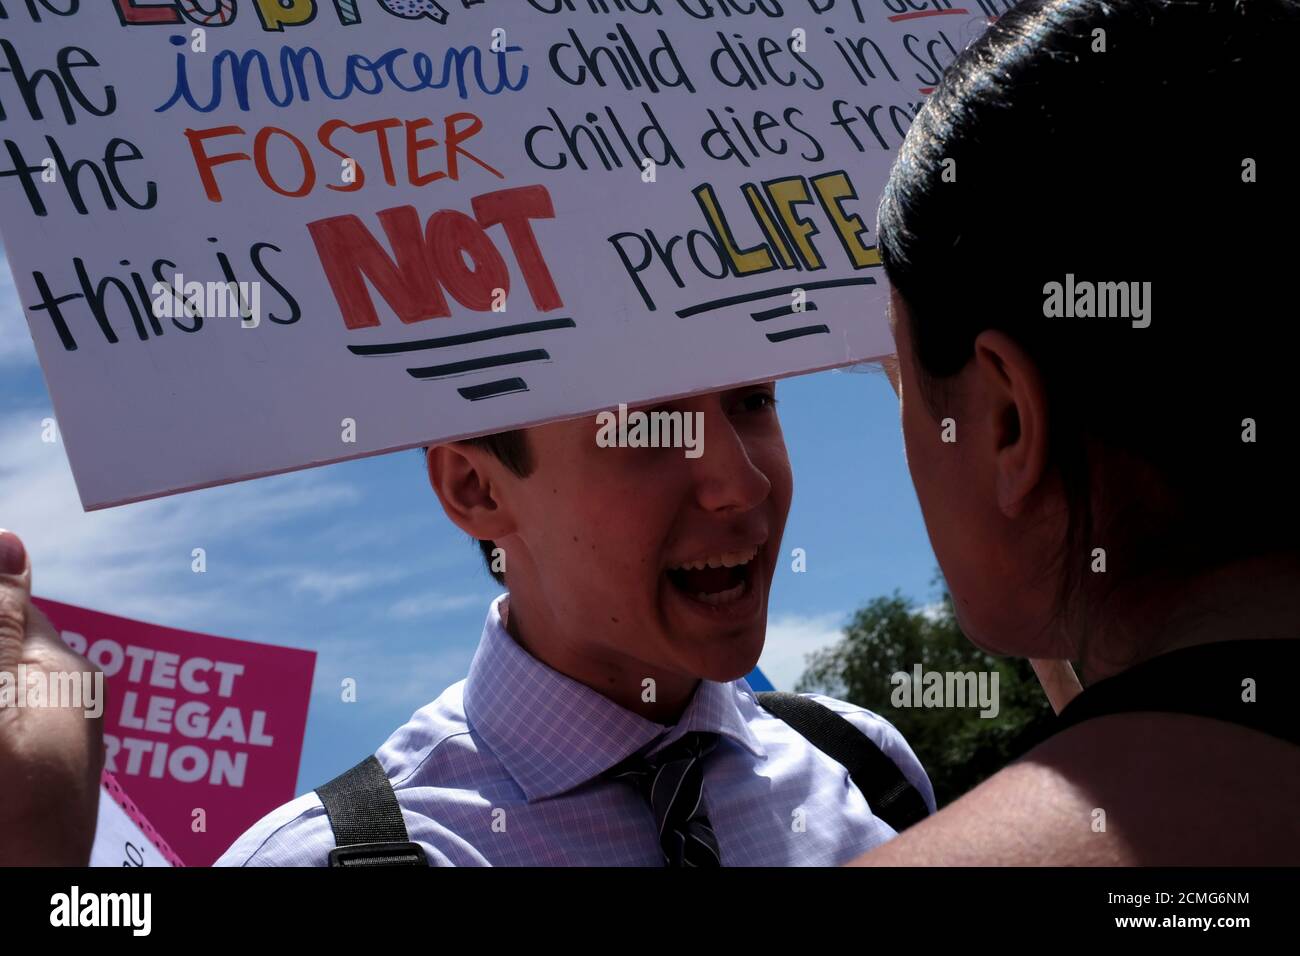 Pro-life activist Boris Kizenko of Holmdel, New Jersey counter-demonstrates at a protest against anti-abortion legislation at the U.S. Supreme Court in Washington, U.S., May 21, 2019. REUTERS/James Lawler Duggan Stock Photo